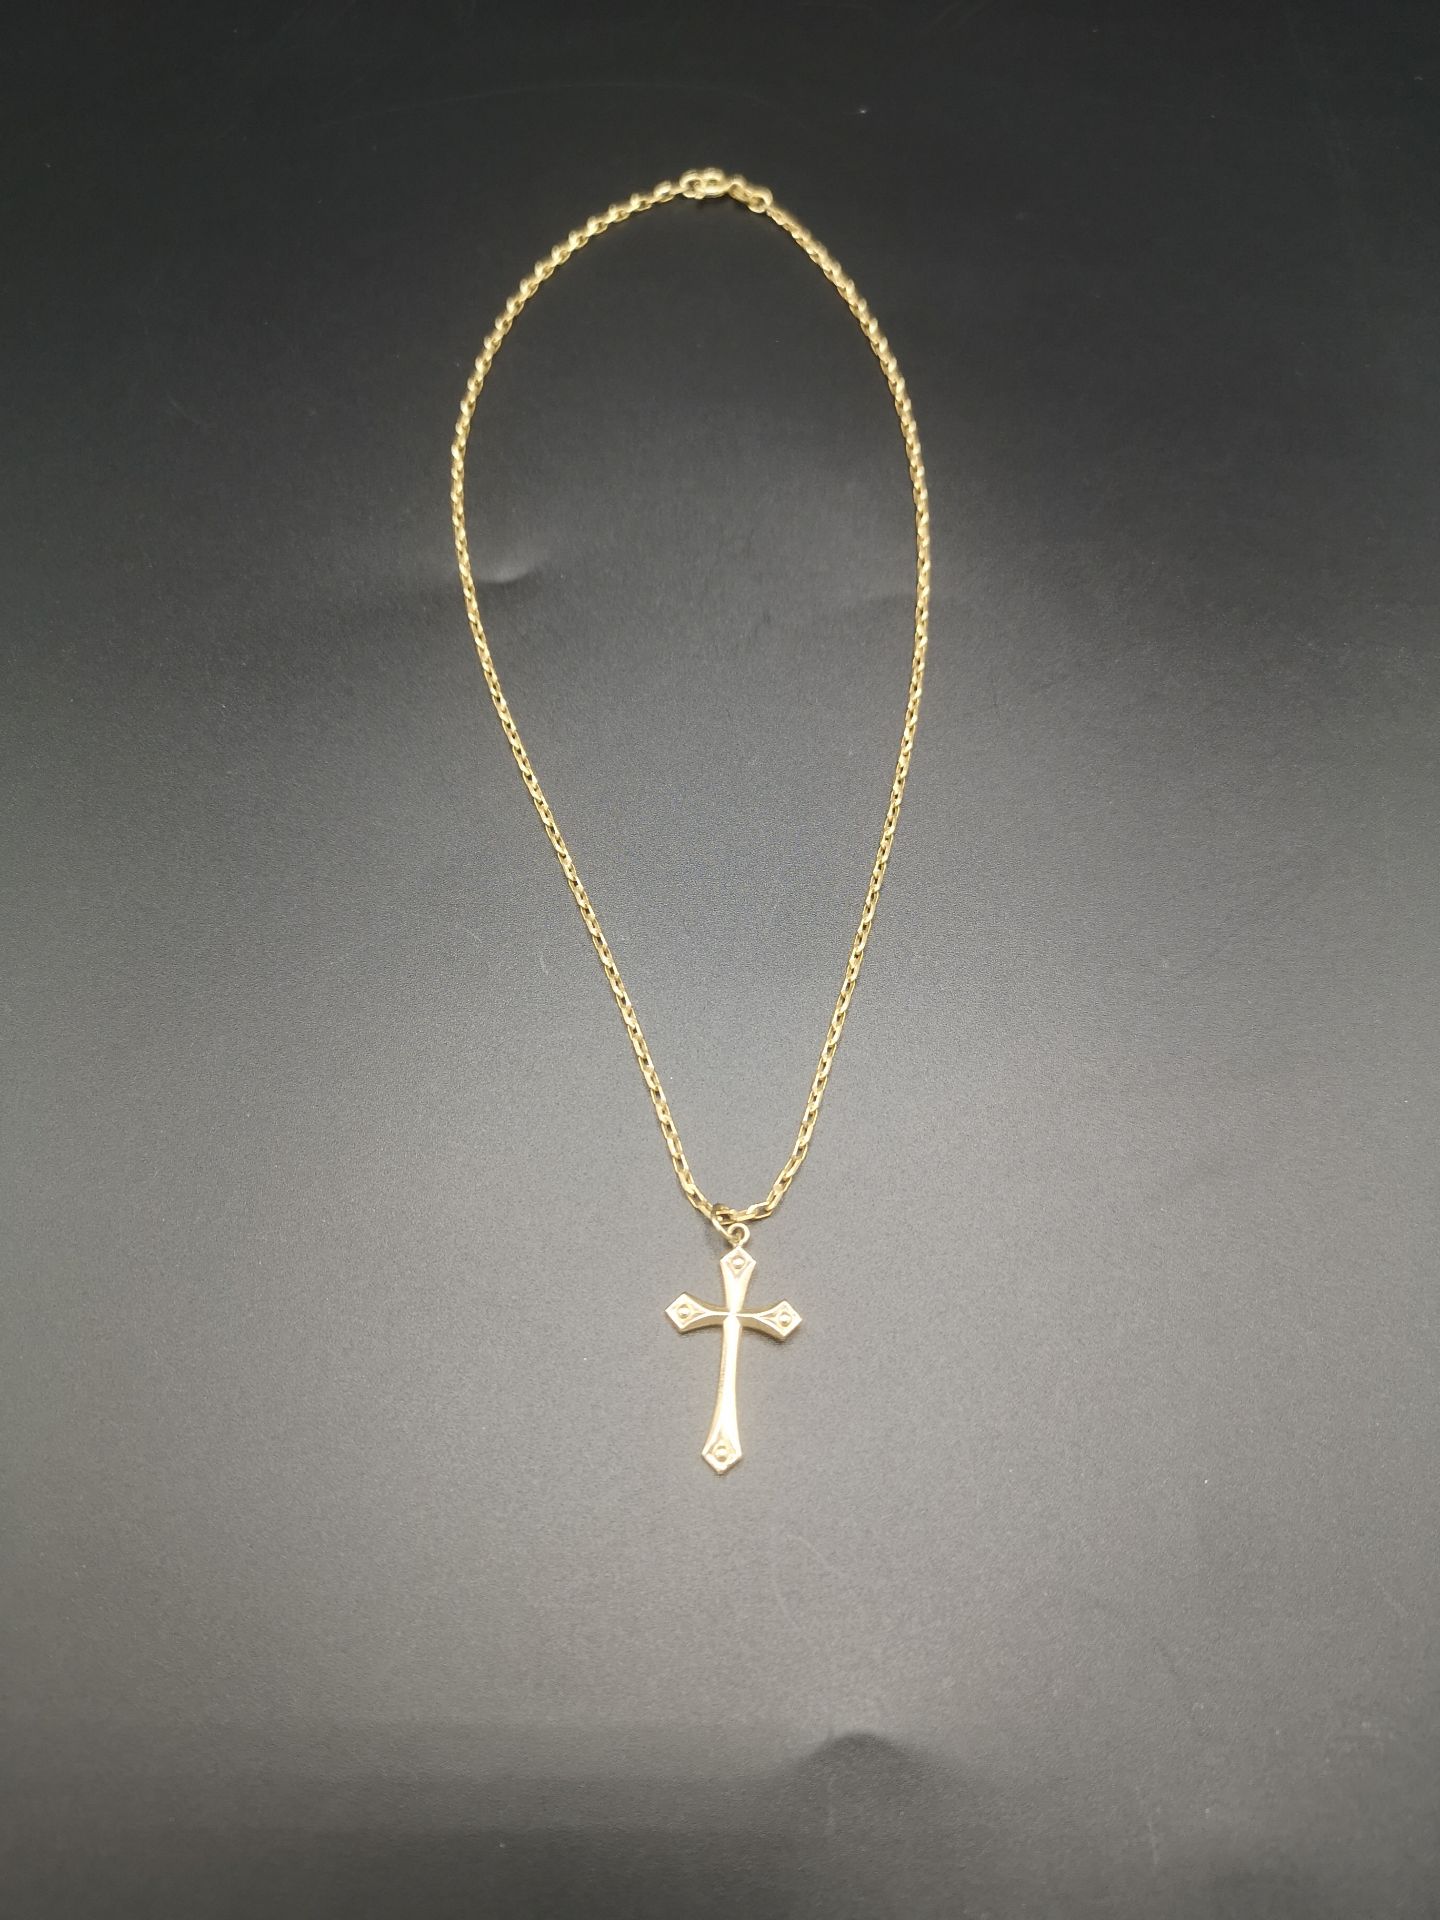 9ct gold necklace and crucifix - Image 2 of 6